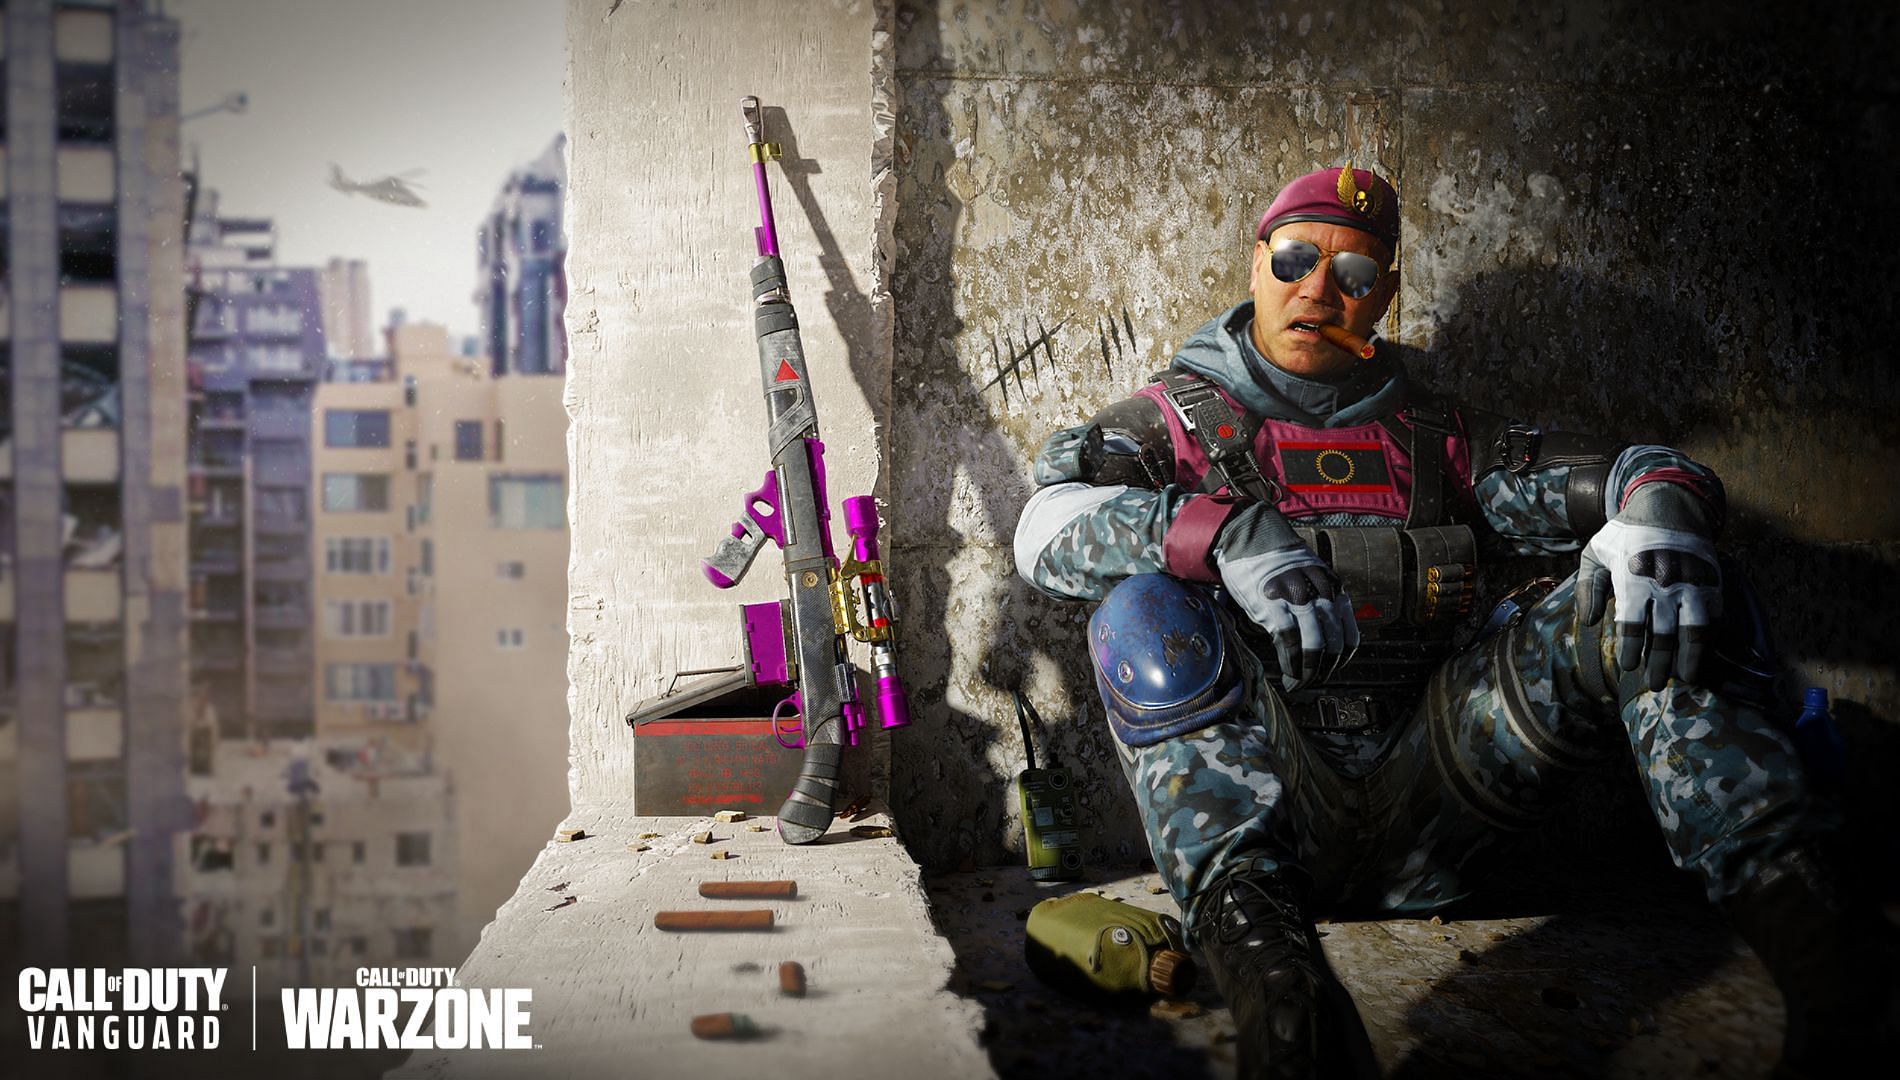 Gabriel T. Rorke of Ghost makes a comeback in Warzone (Image via Activision)